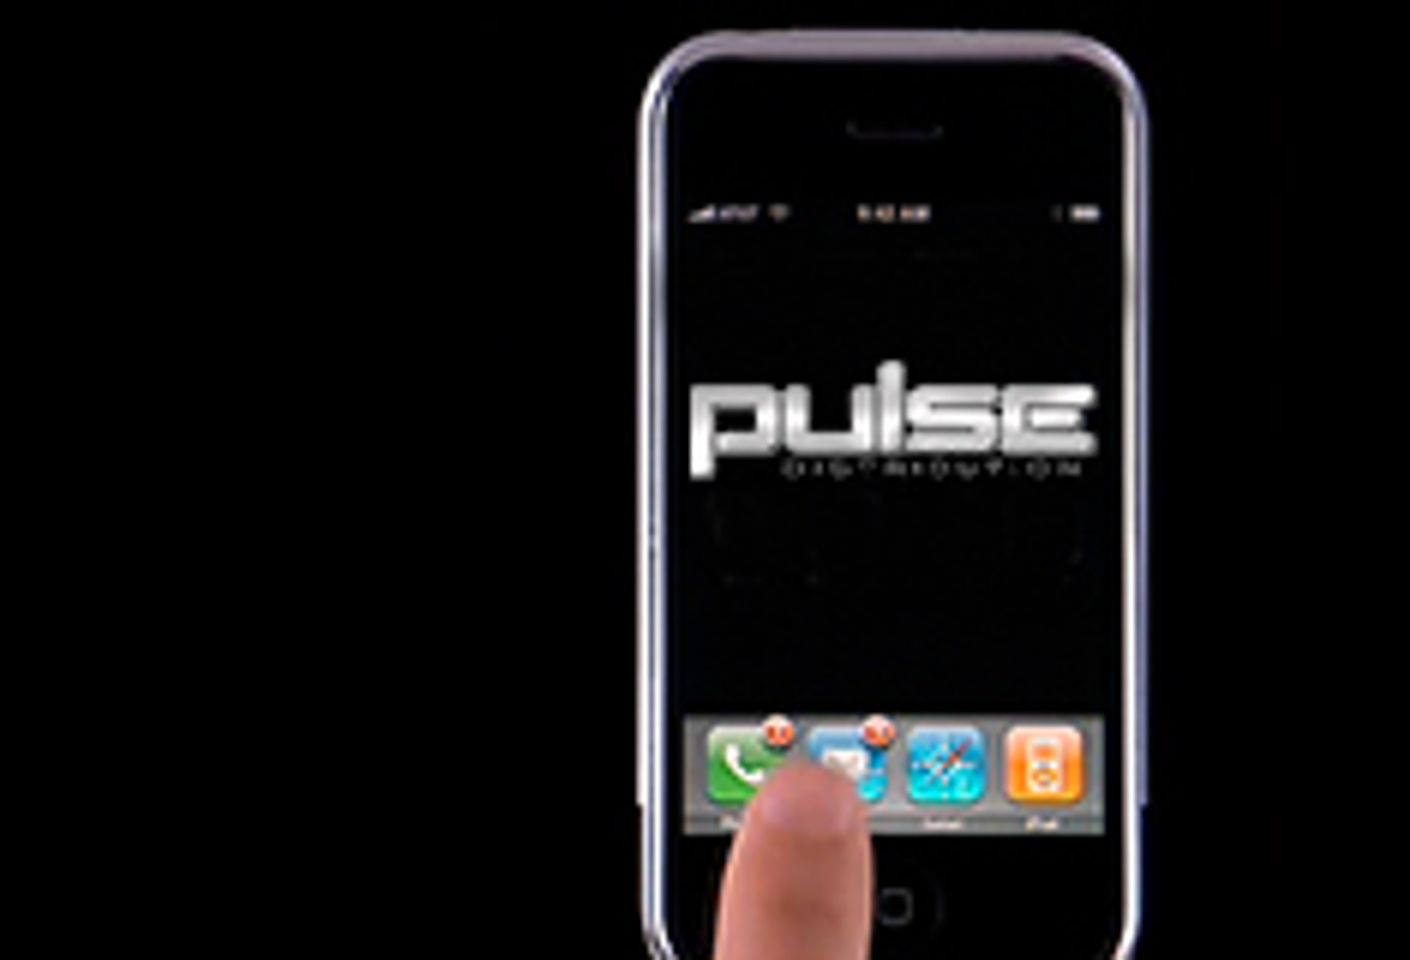 Pulse Offers PodDisc Porn for iPhone